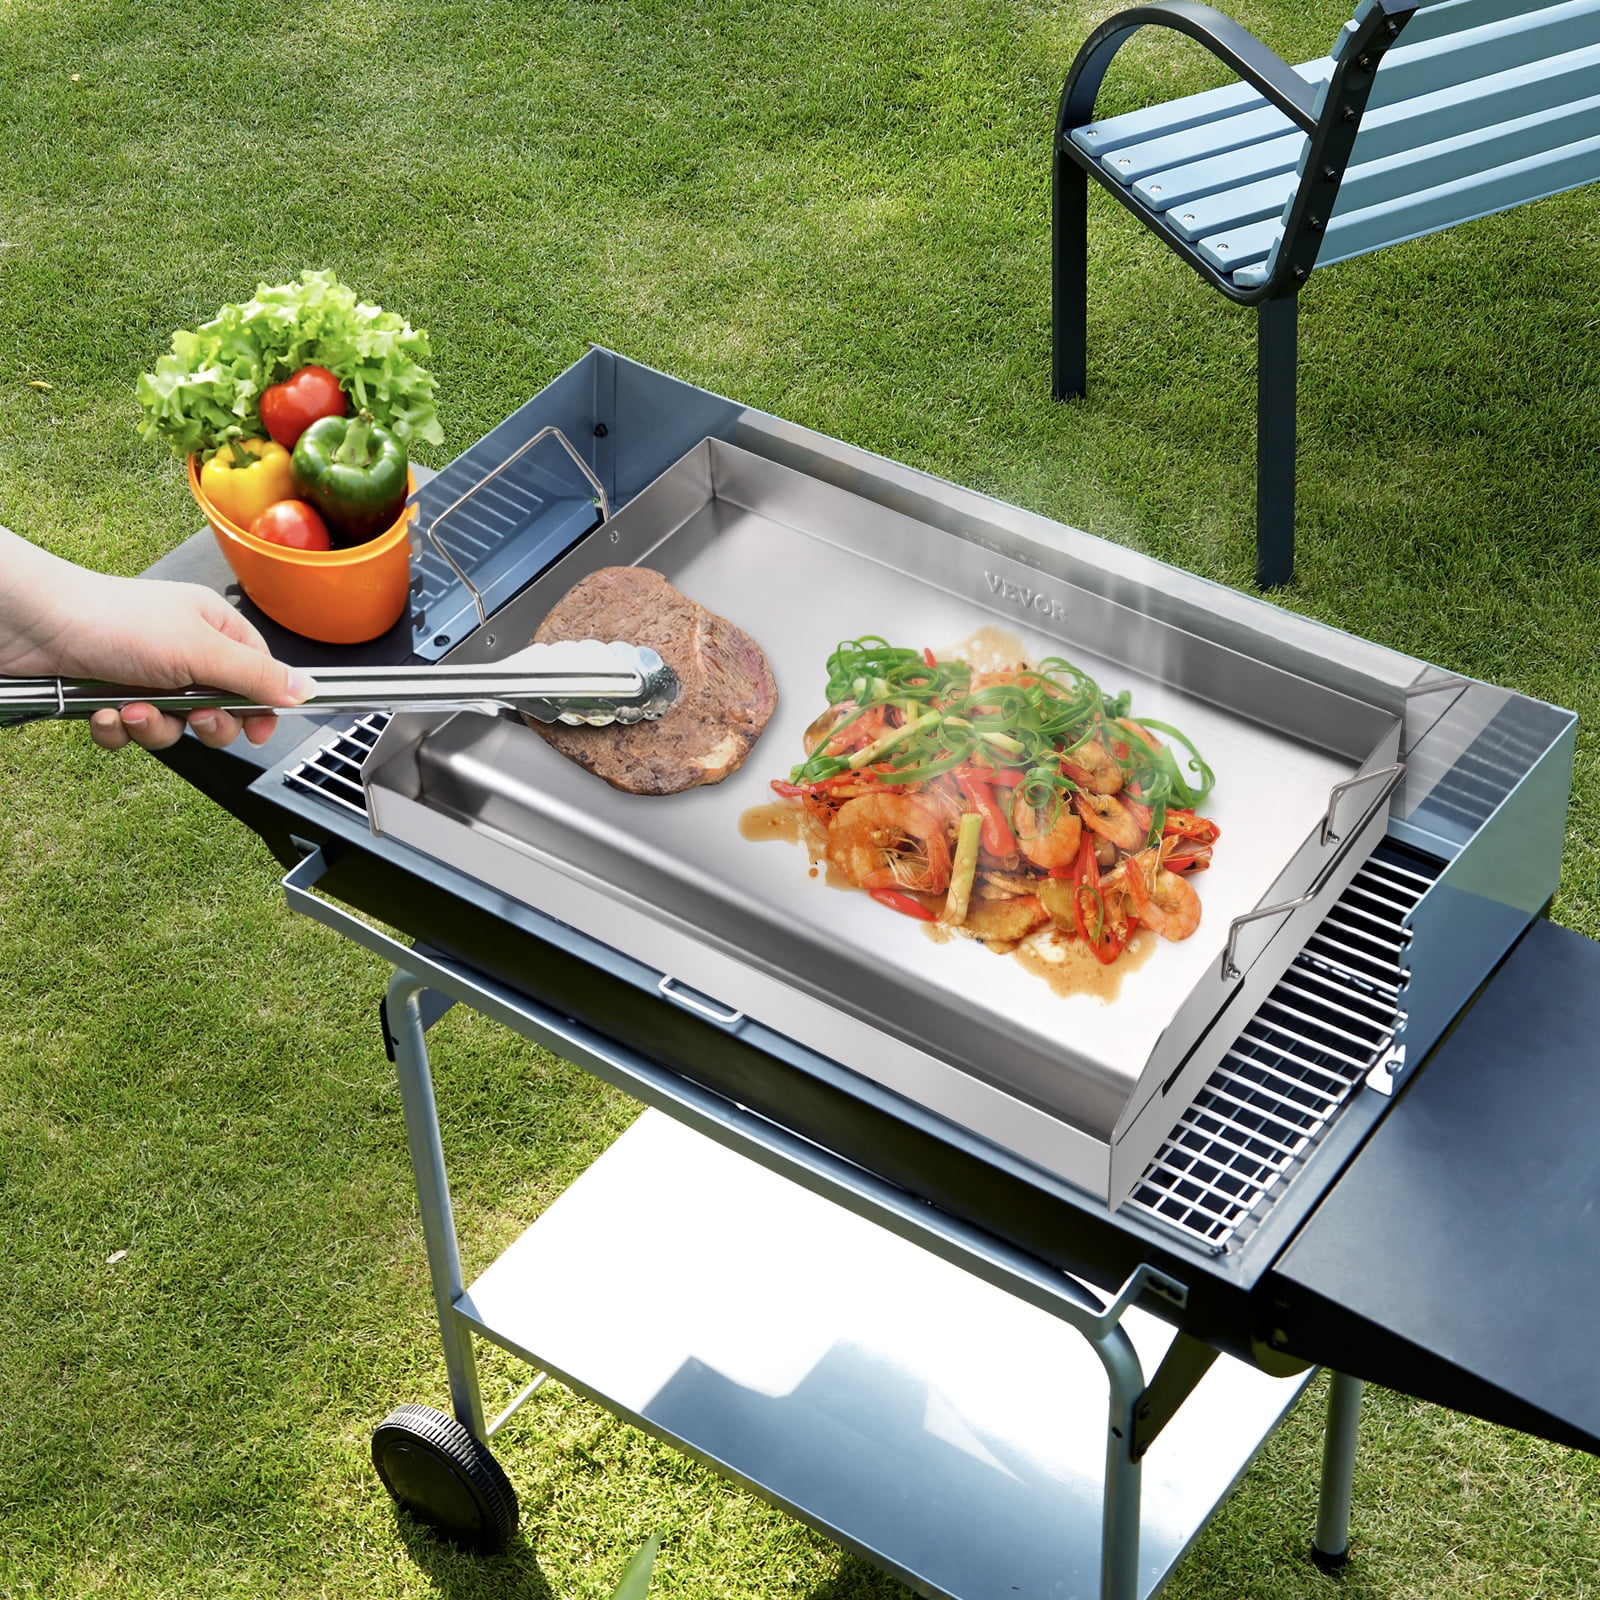 BENTISM 23.5x16 Flat Top Griddle Stainless Steel BBQ Gas Grill 2